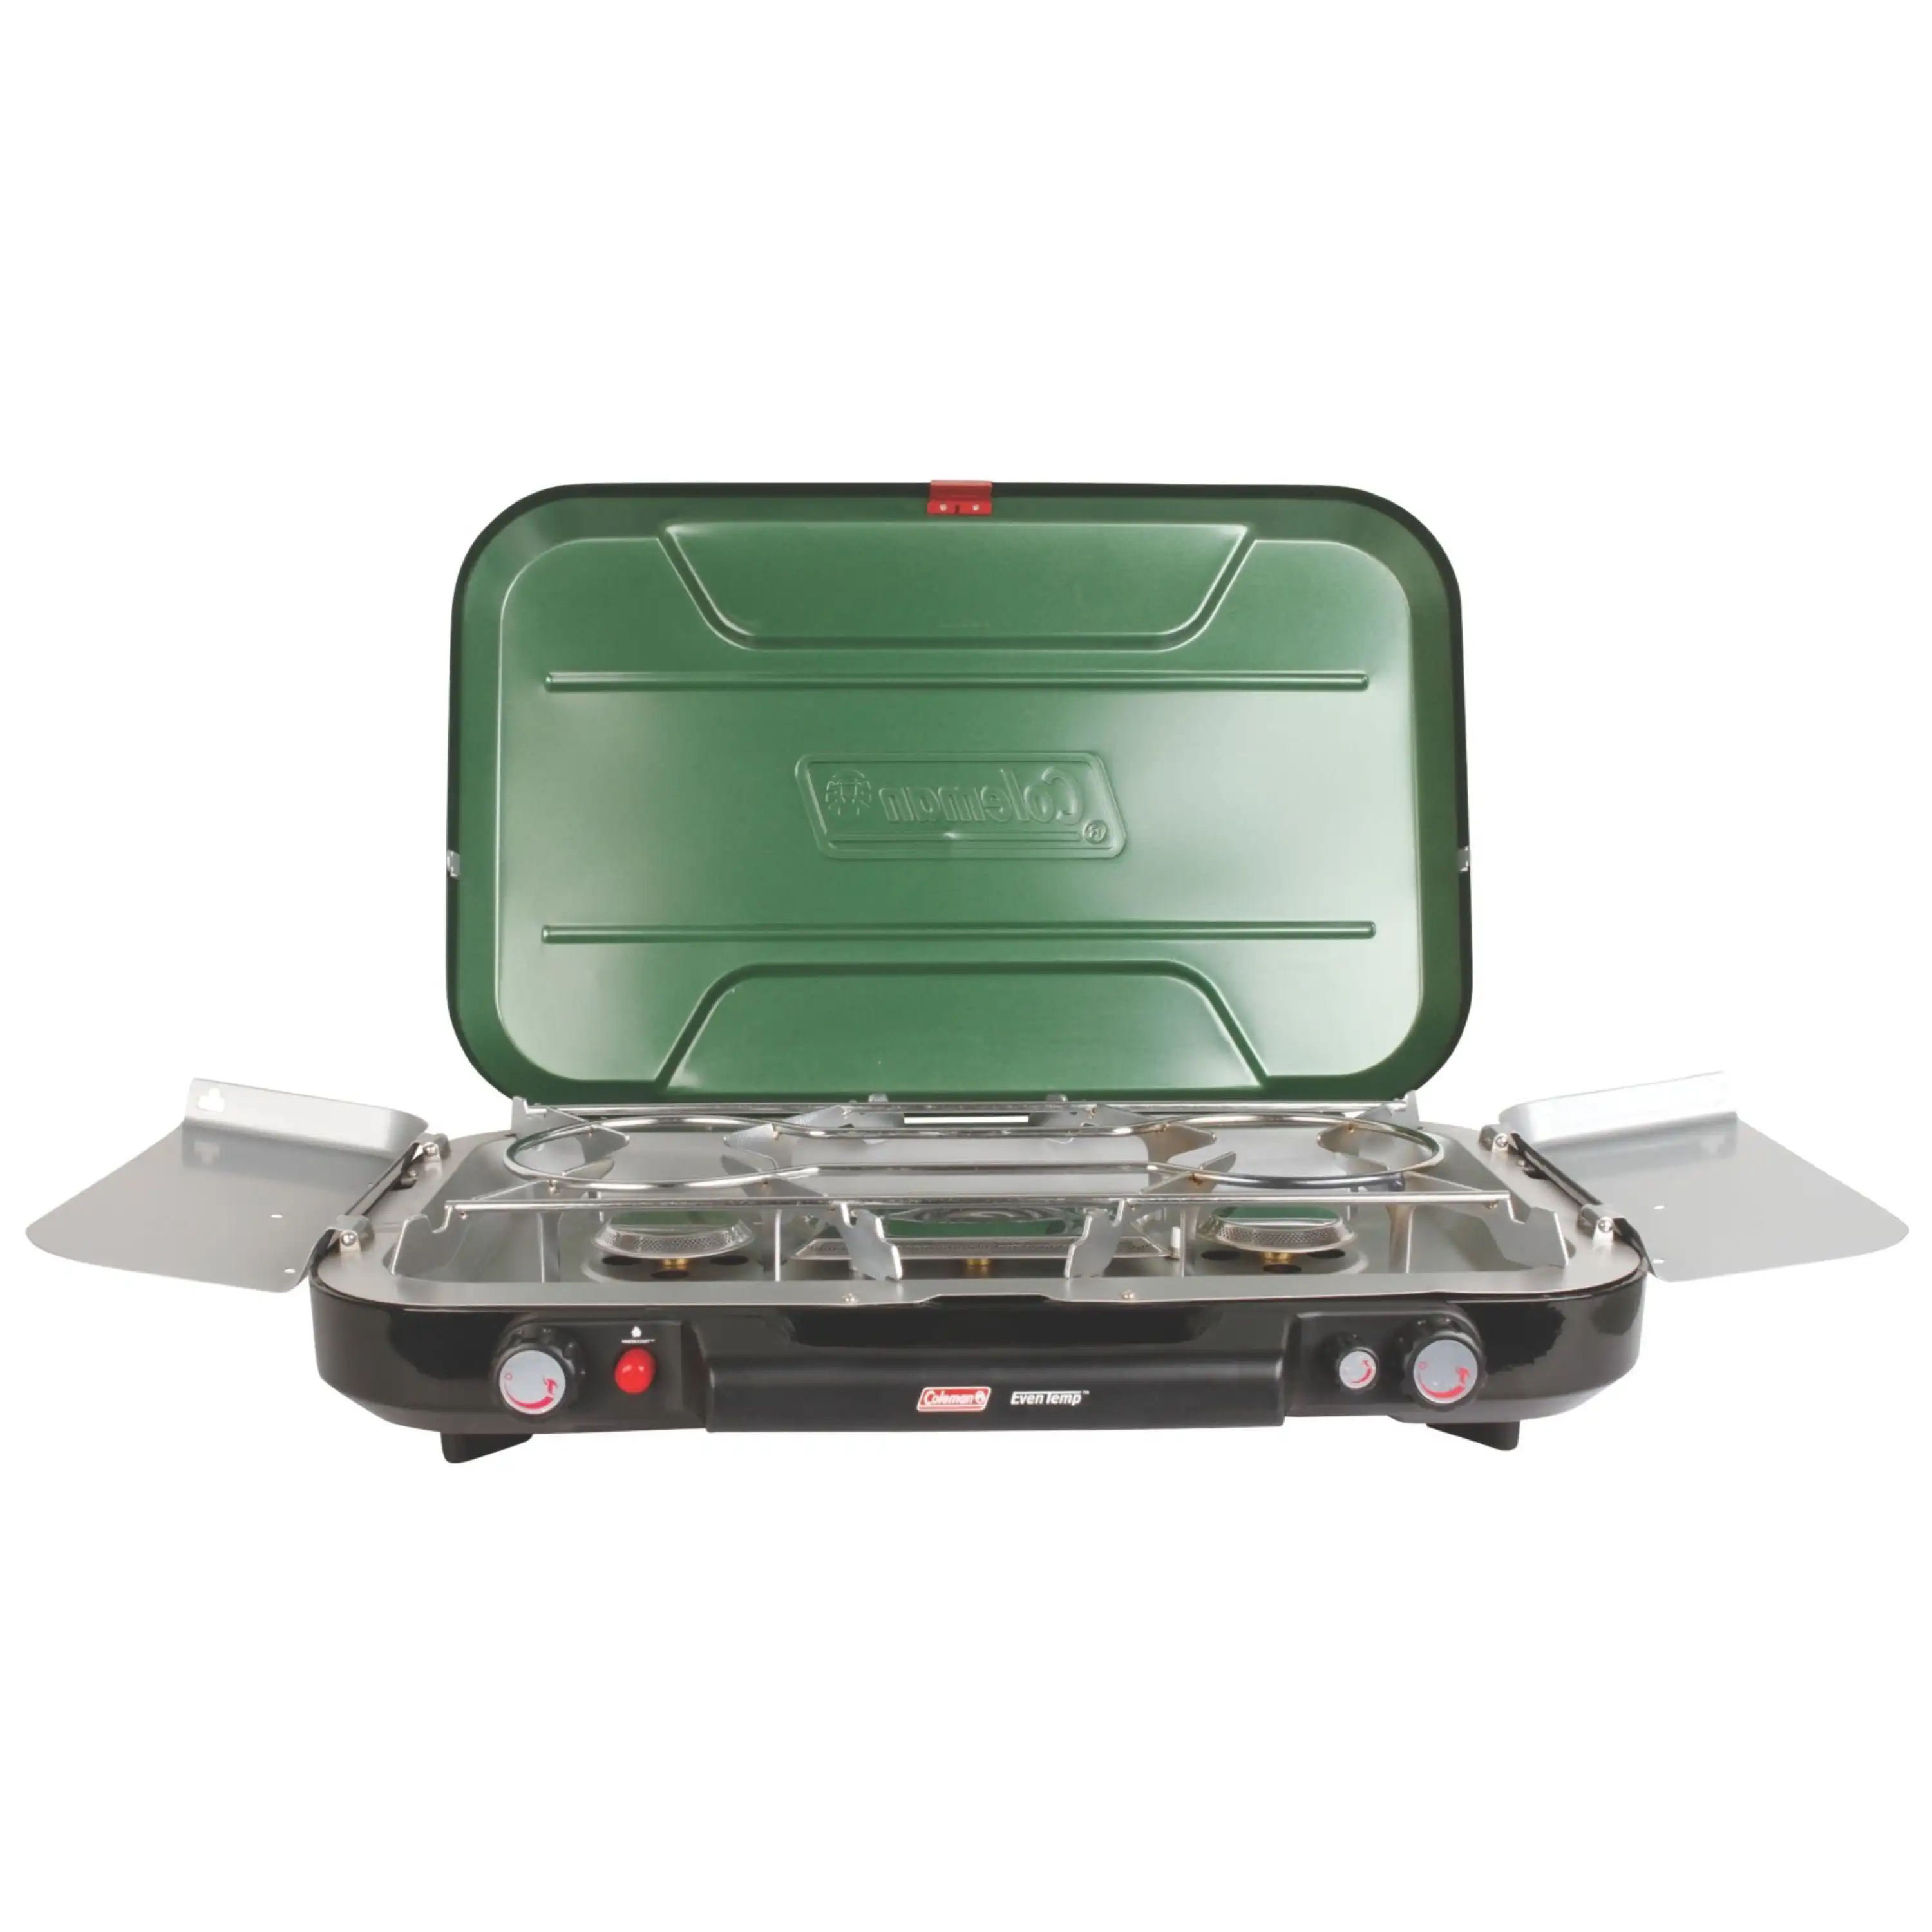 

Coleman Even-Temp 3-Burner Propane Camp Stove, camping cooking